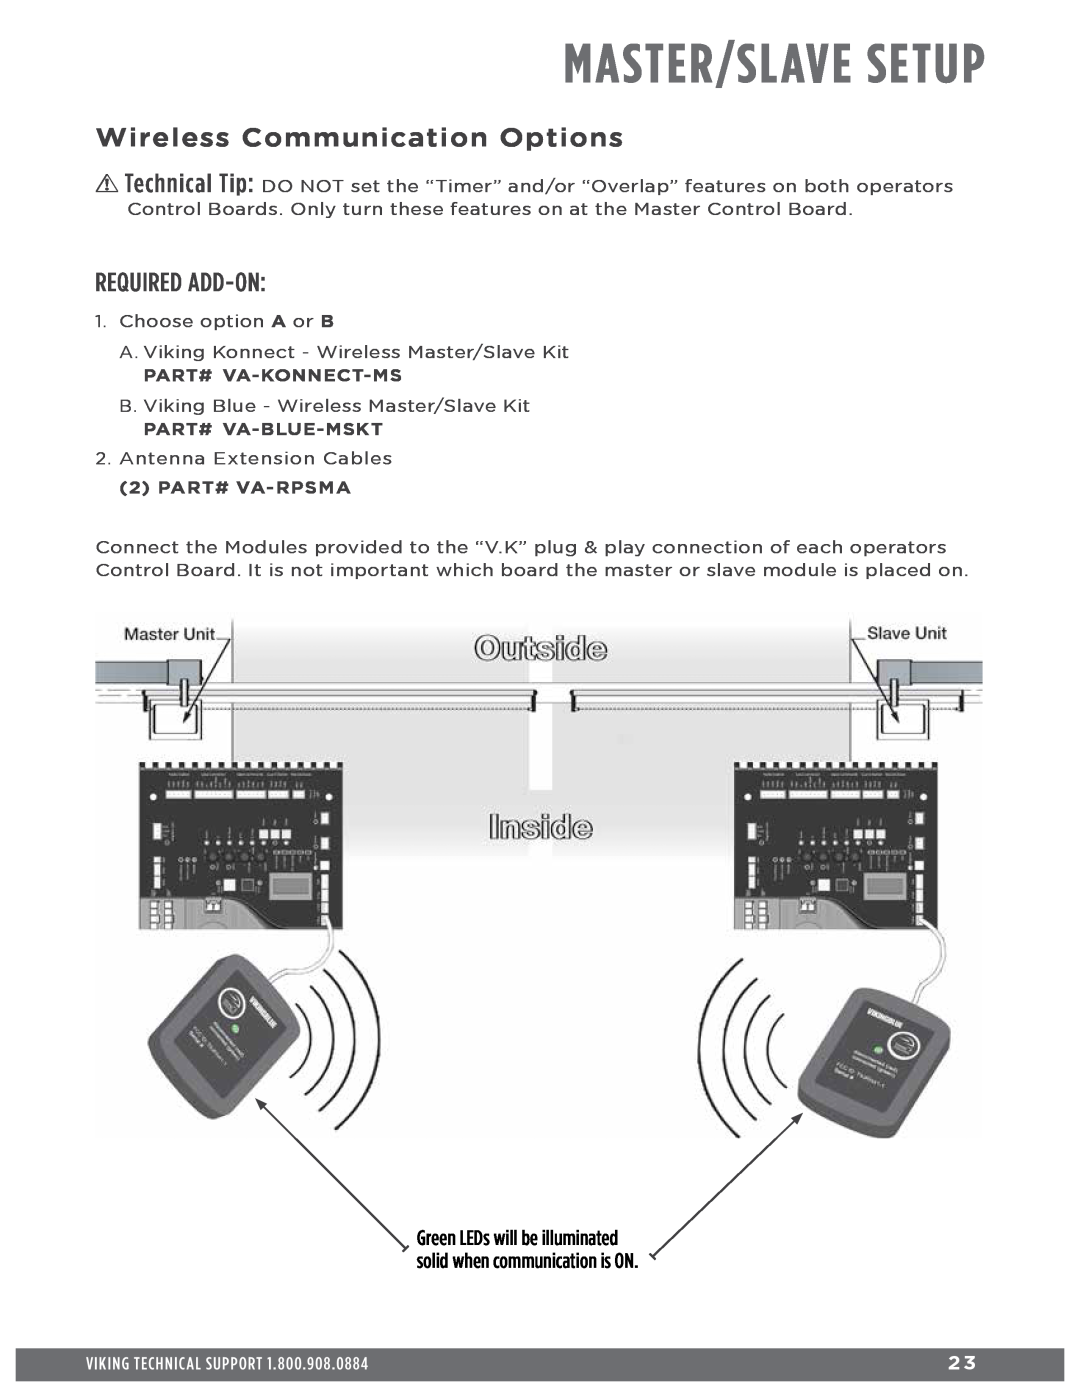 Viking Access Systems Q7 Wireless Communication Options, Required Add-On, Master/Slave Setup, Viking Technical Support 